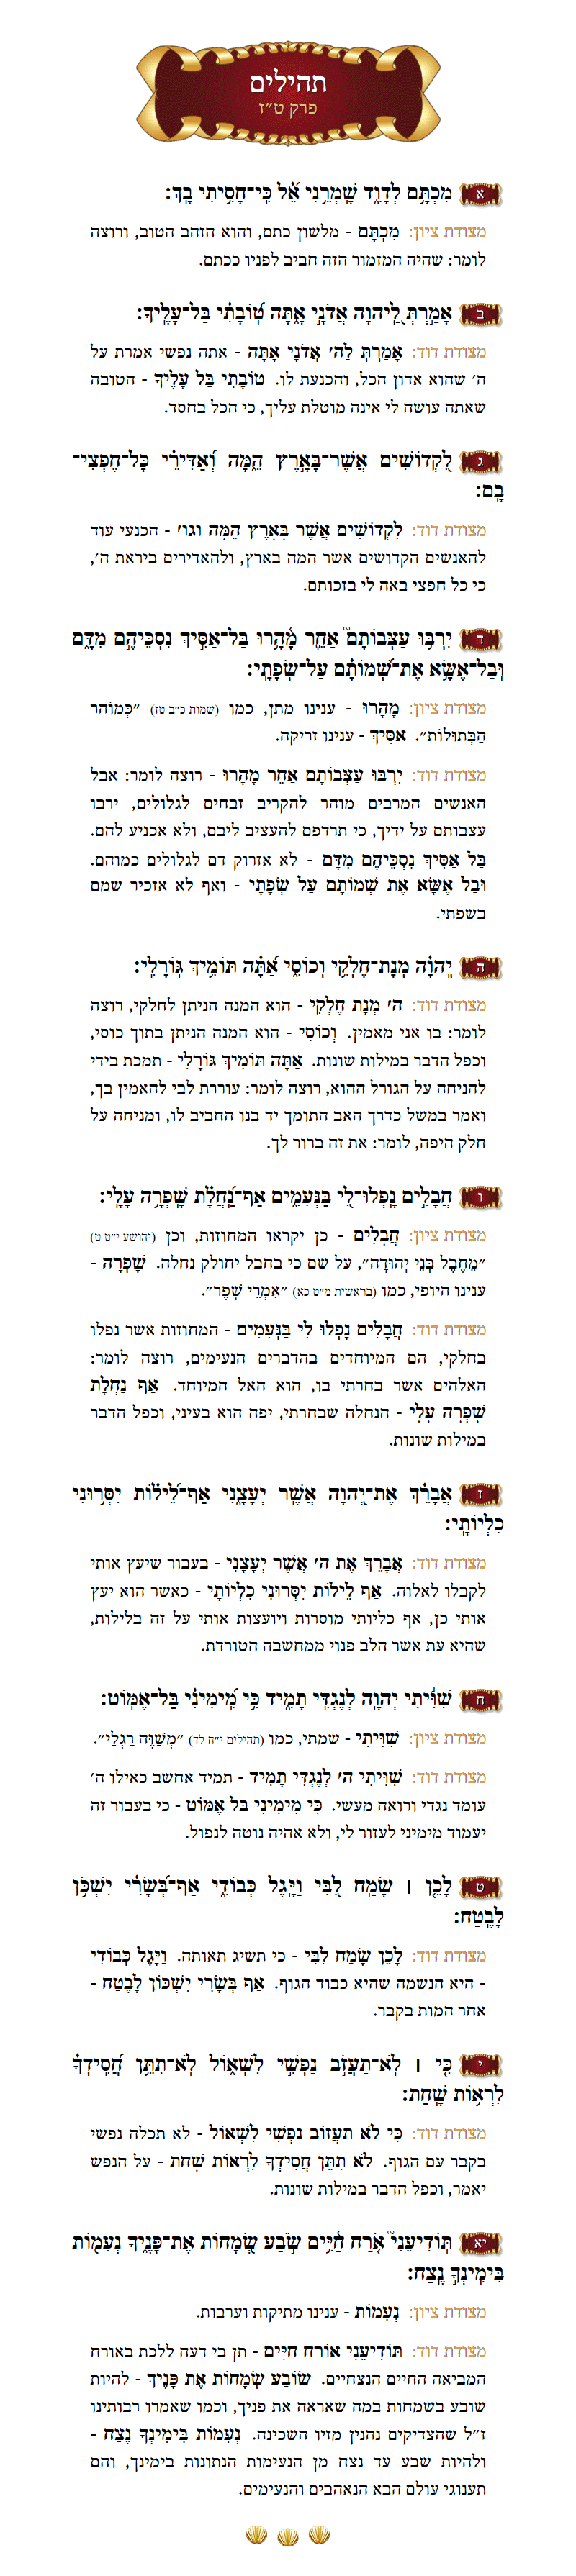 Sefer Tehillim Chapter 16 with commentary